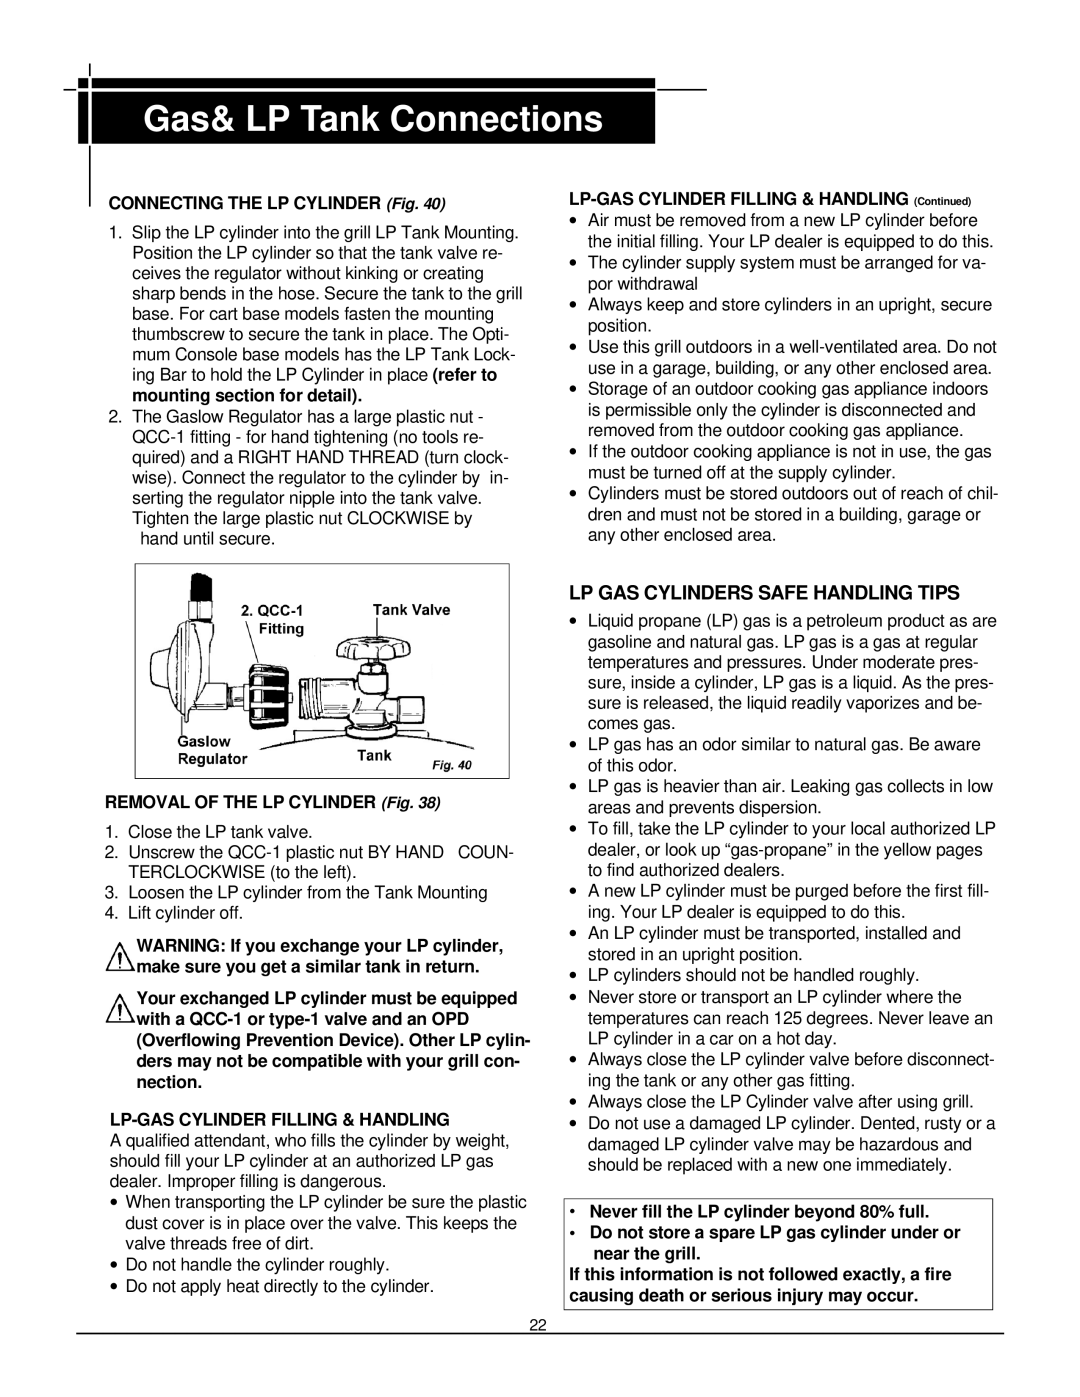 MHP TJK, WNK, JNR owner manual Gas& LP Tank Connections, Lp Gas Cylinders Safe Handling Tips, CONNECTING THE LP CYLINDER Fig 